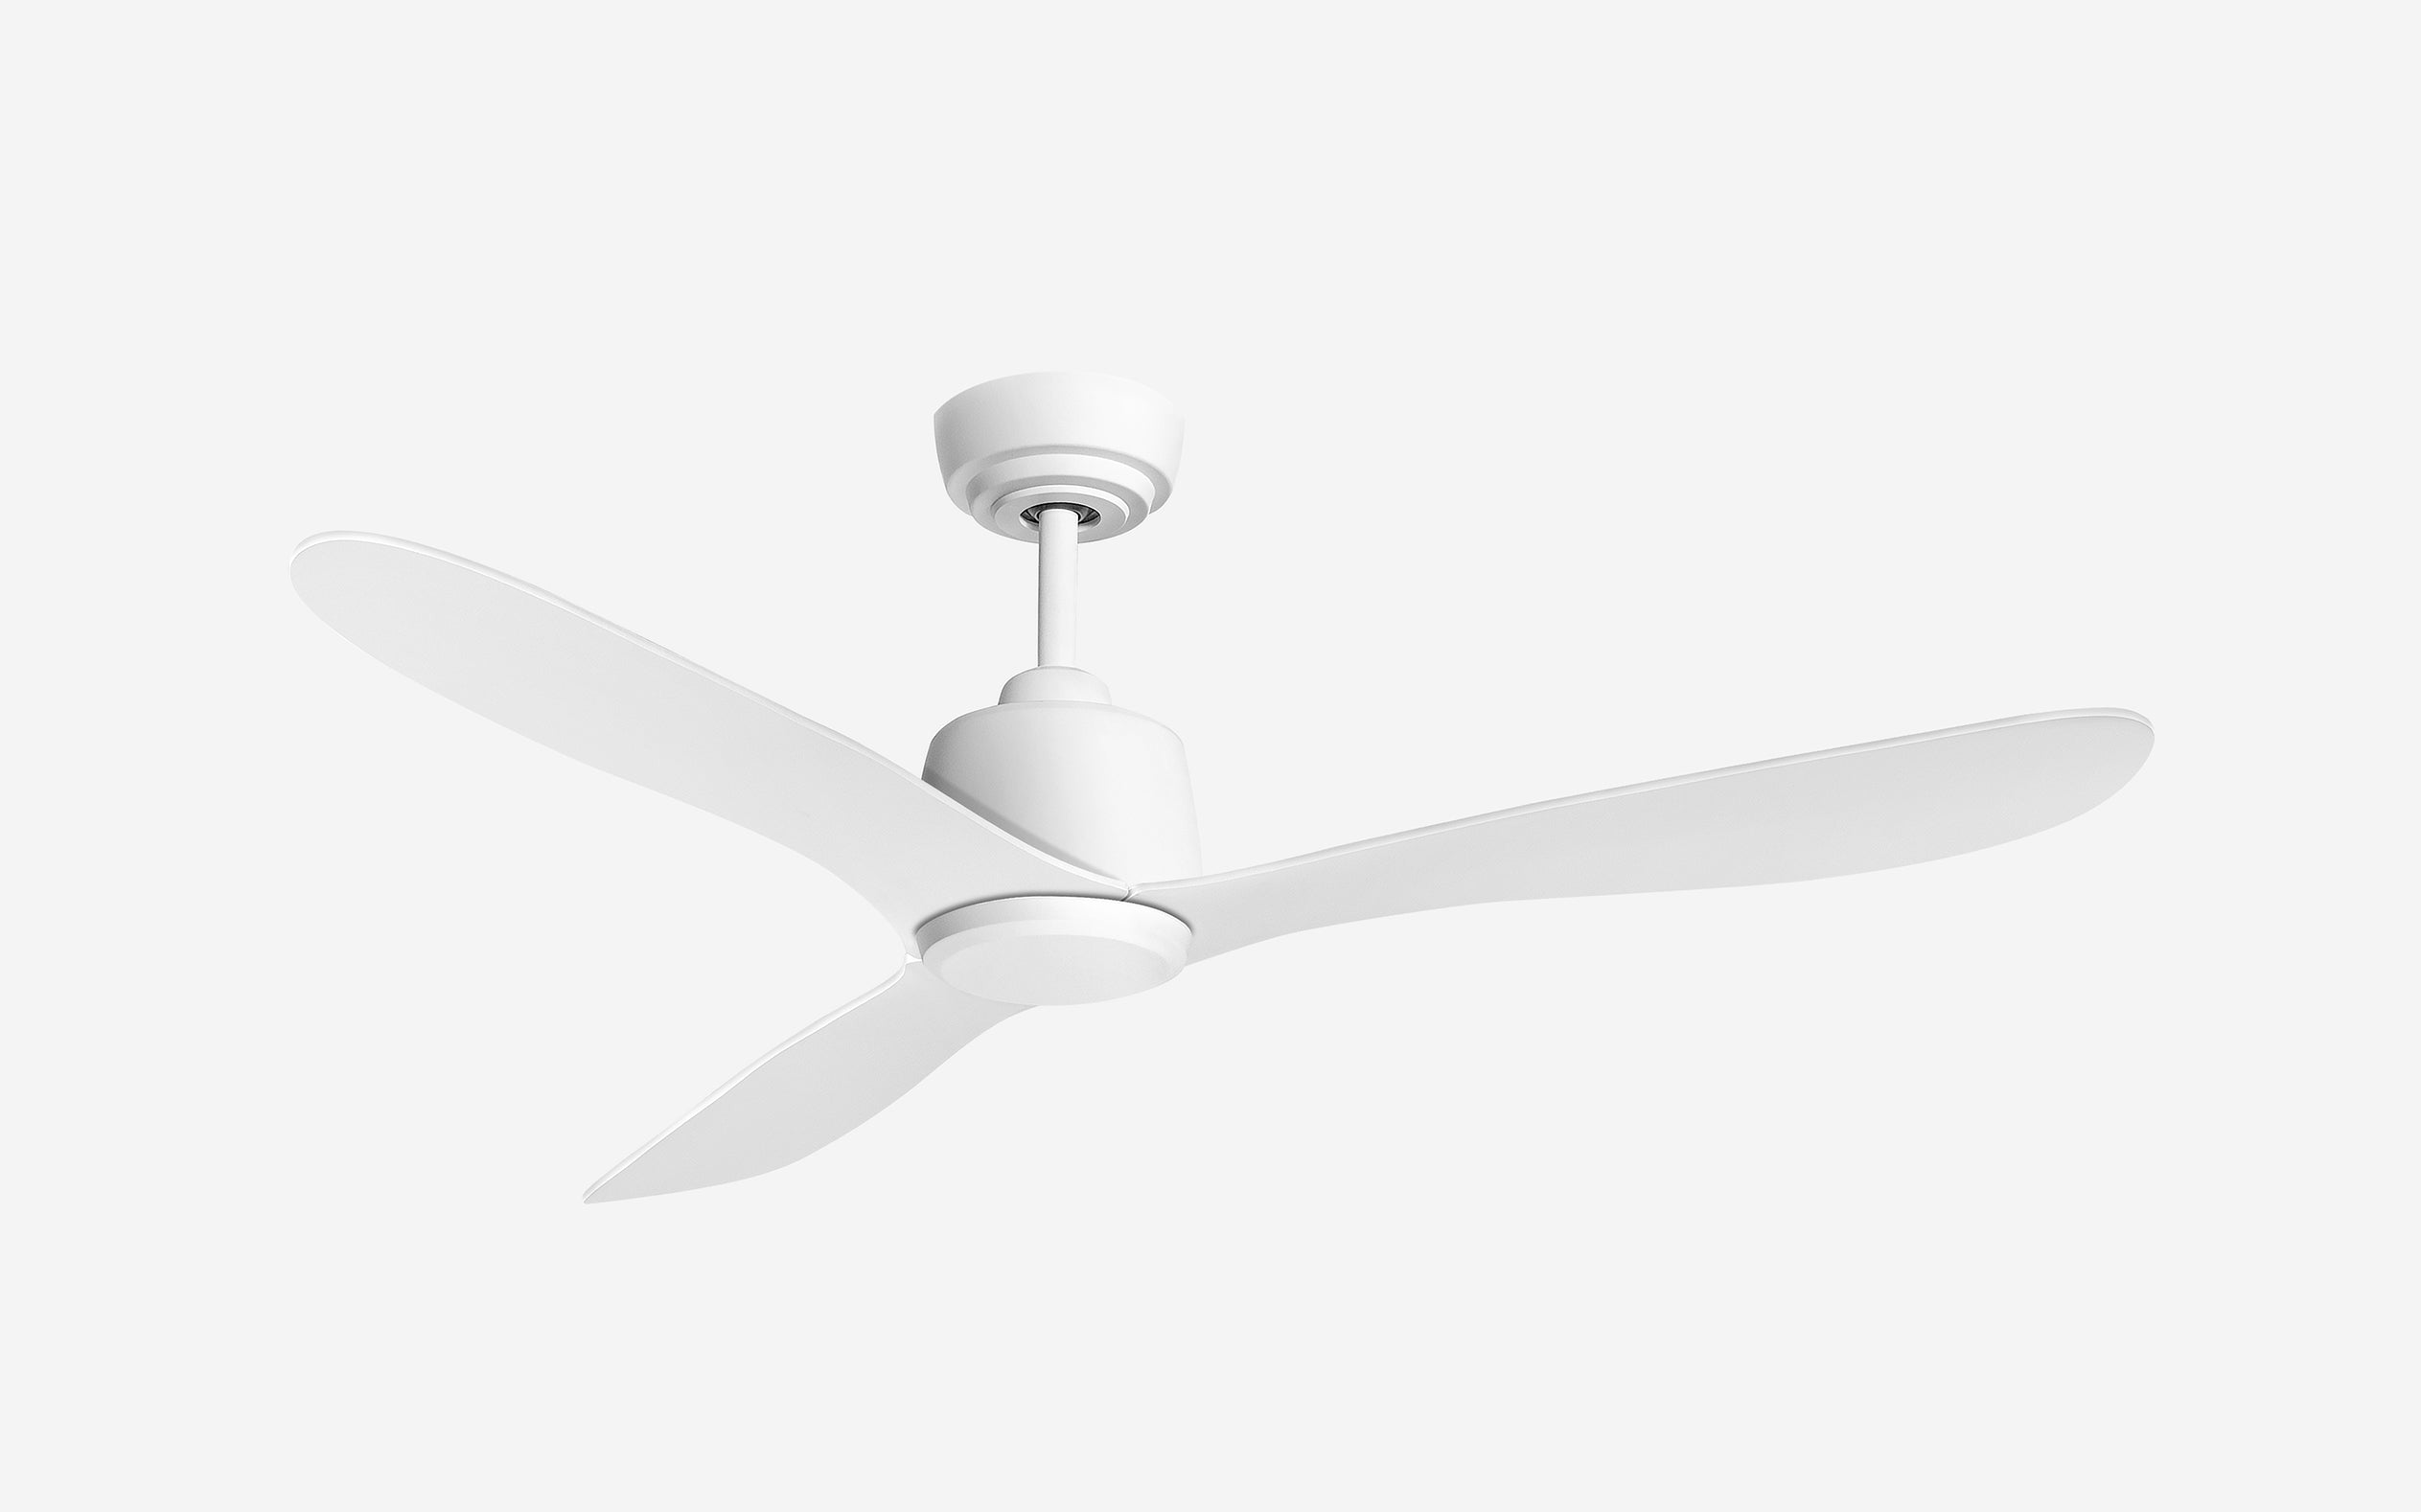 Diamond Storm Ceiling Fan - #Body Color_White|Blade Color_White|Blade Size_48"